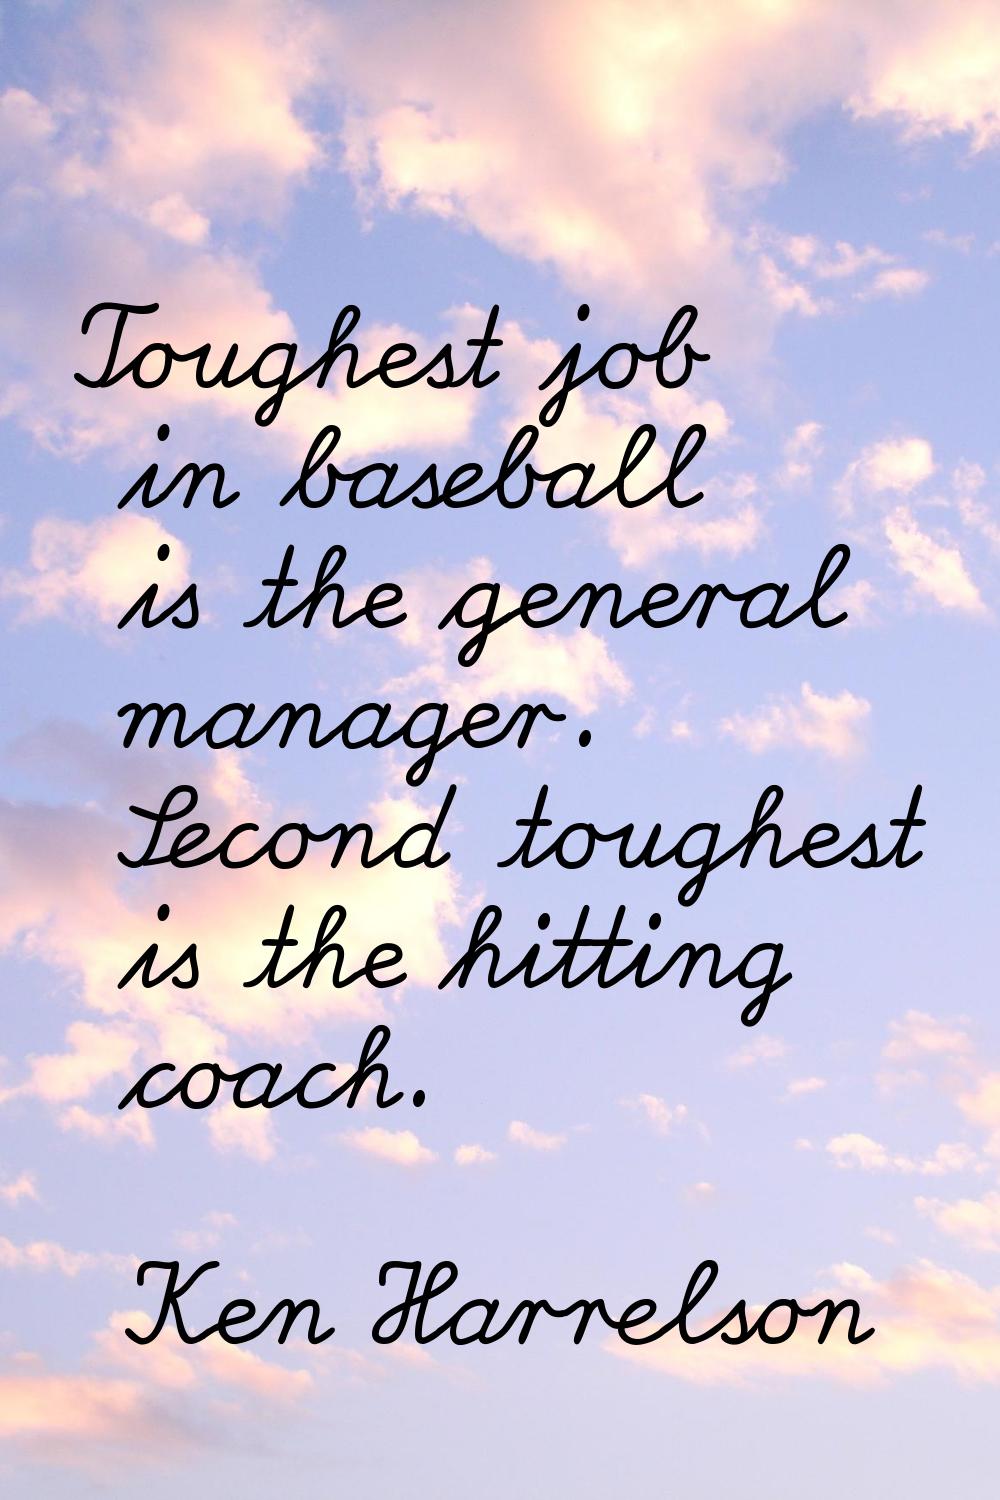 Toughest job in baseball is the general manager. Second toughest is the hitting coach.